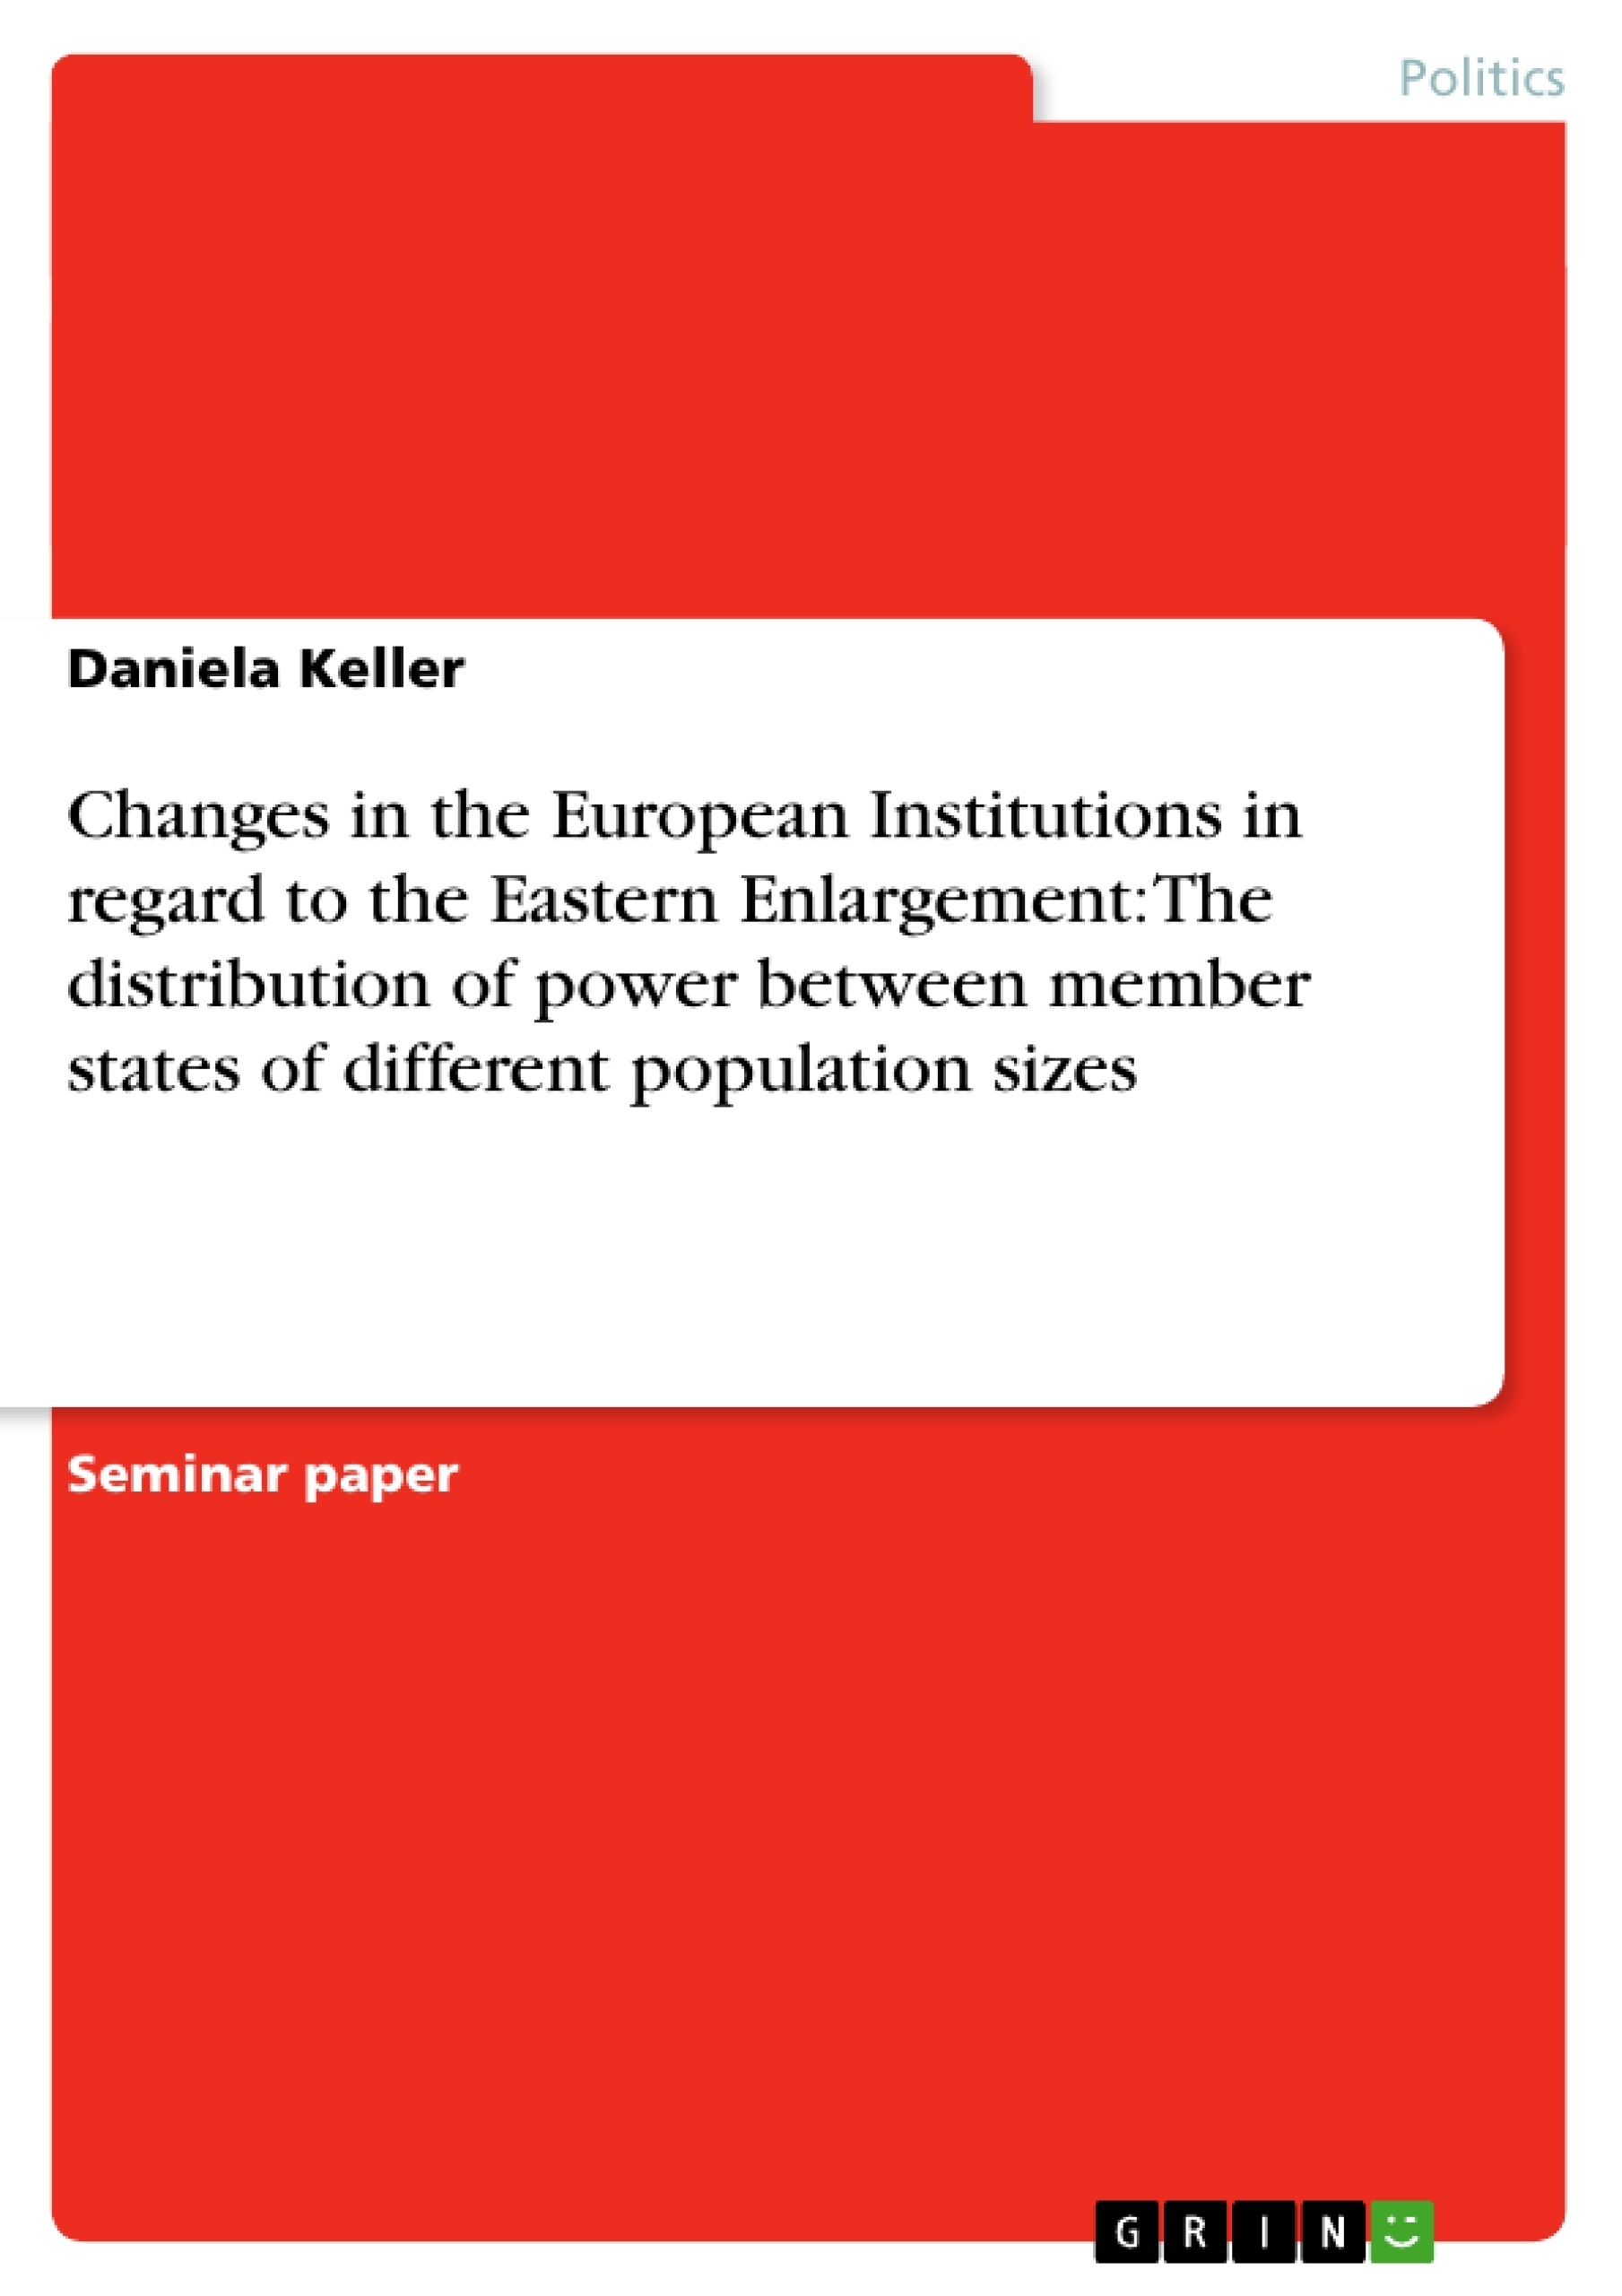 Title: Changes in the European Institutions in regard to the Eastern Enlargement: The distribution of power between member states of different population sizes